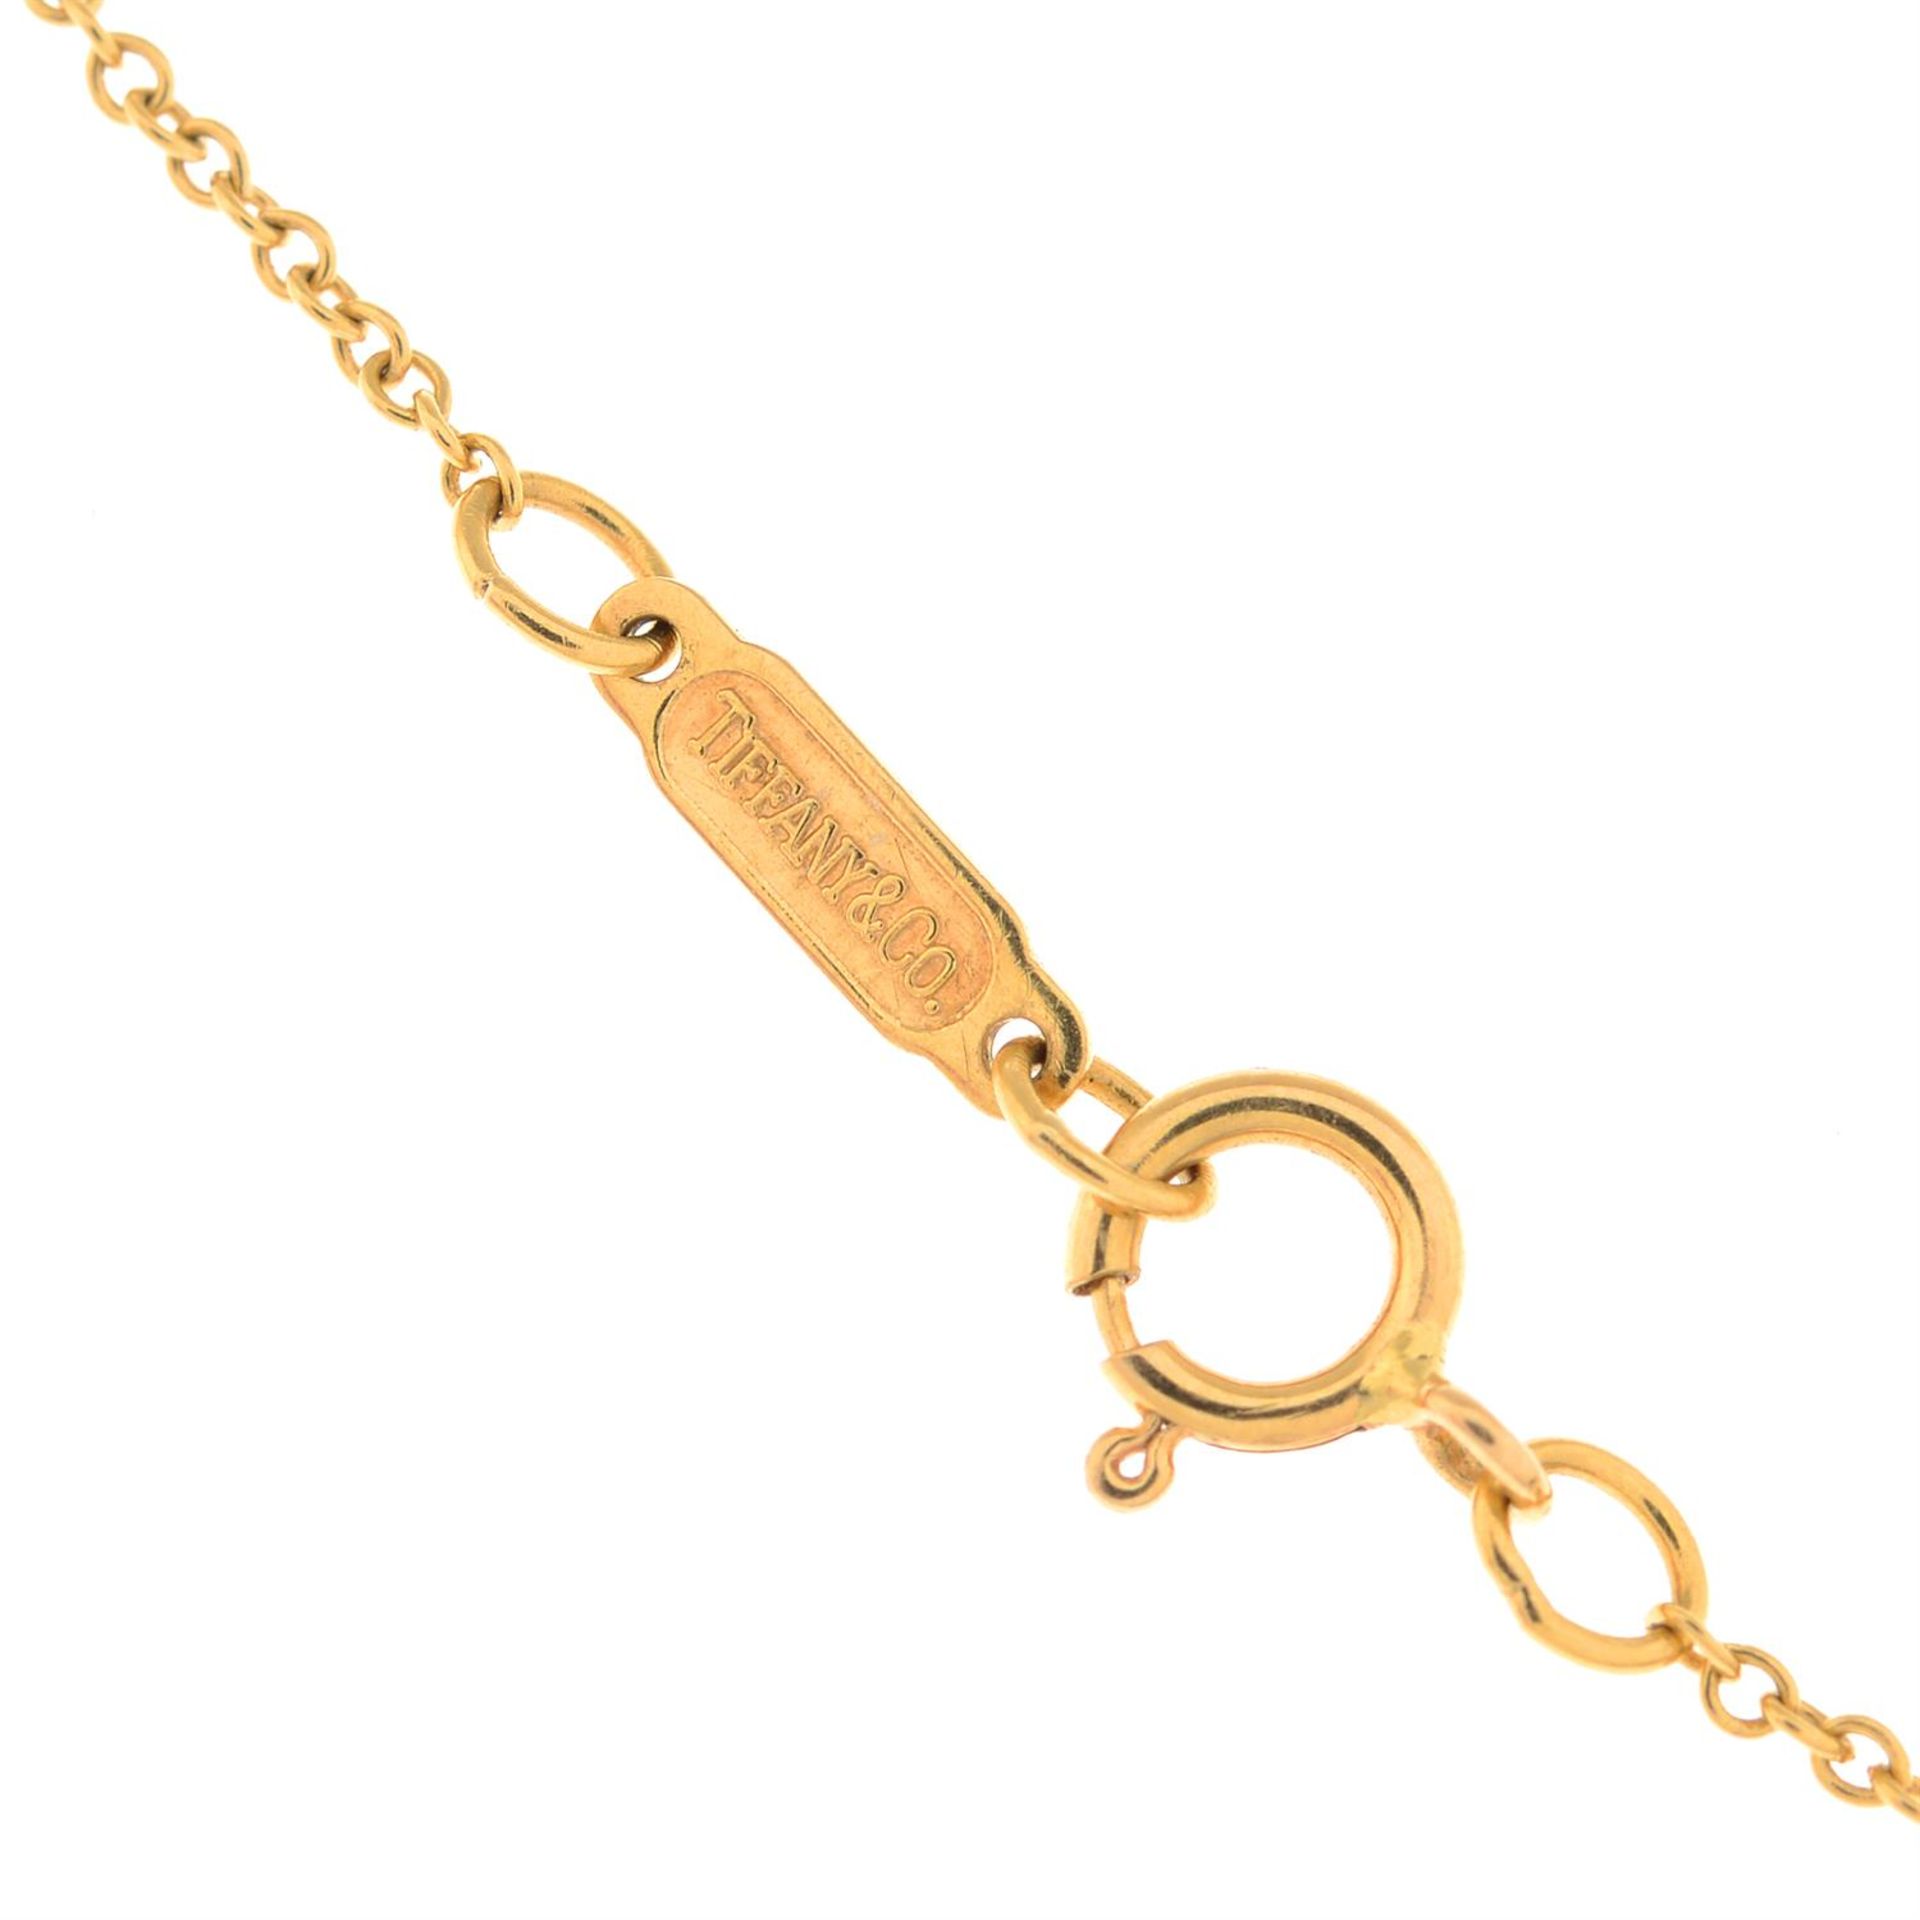 A brilliant-cut diamond heart pendant, on an integral trace-link chain, by Tiffany & Co. - Image 4 of 4